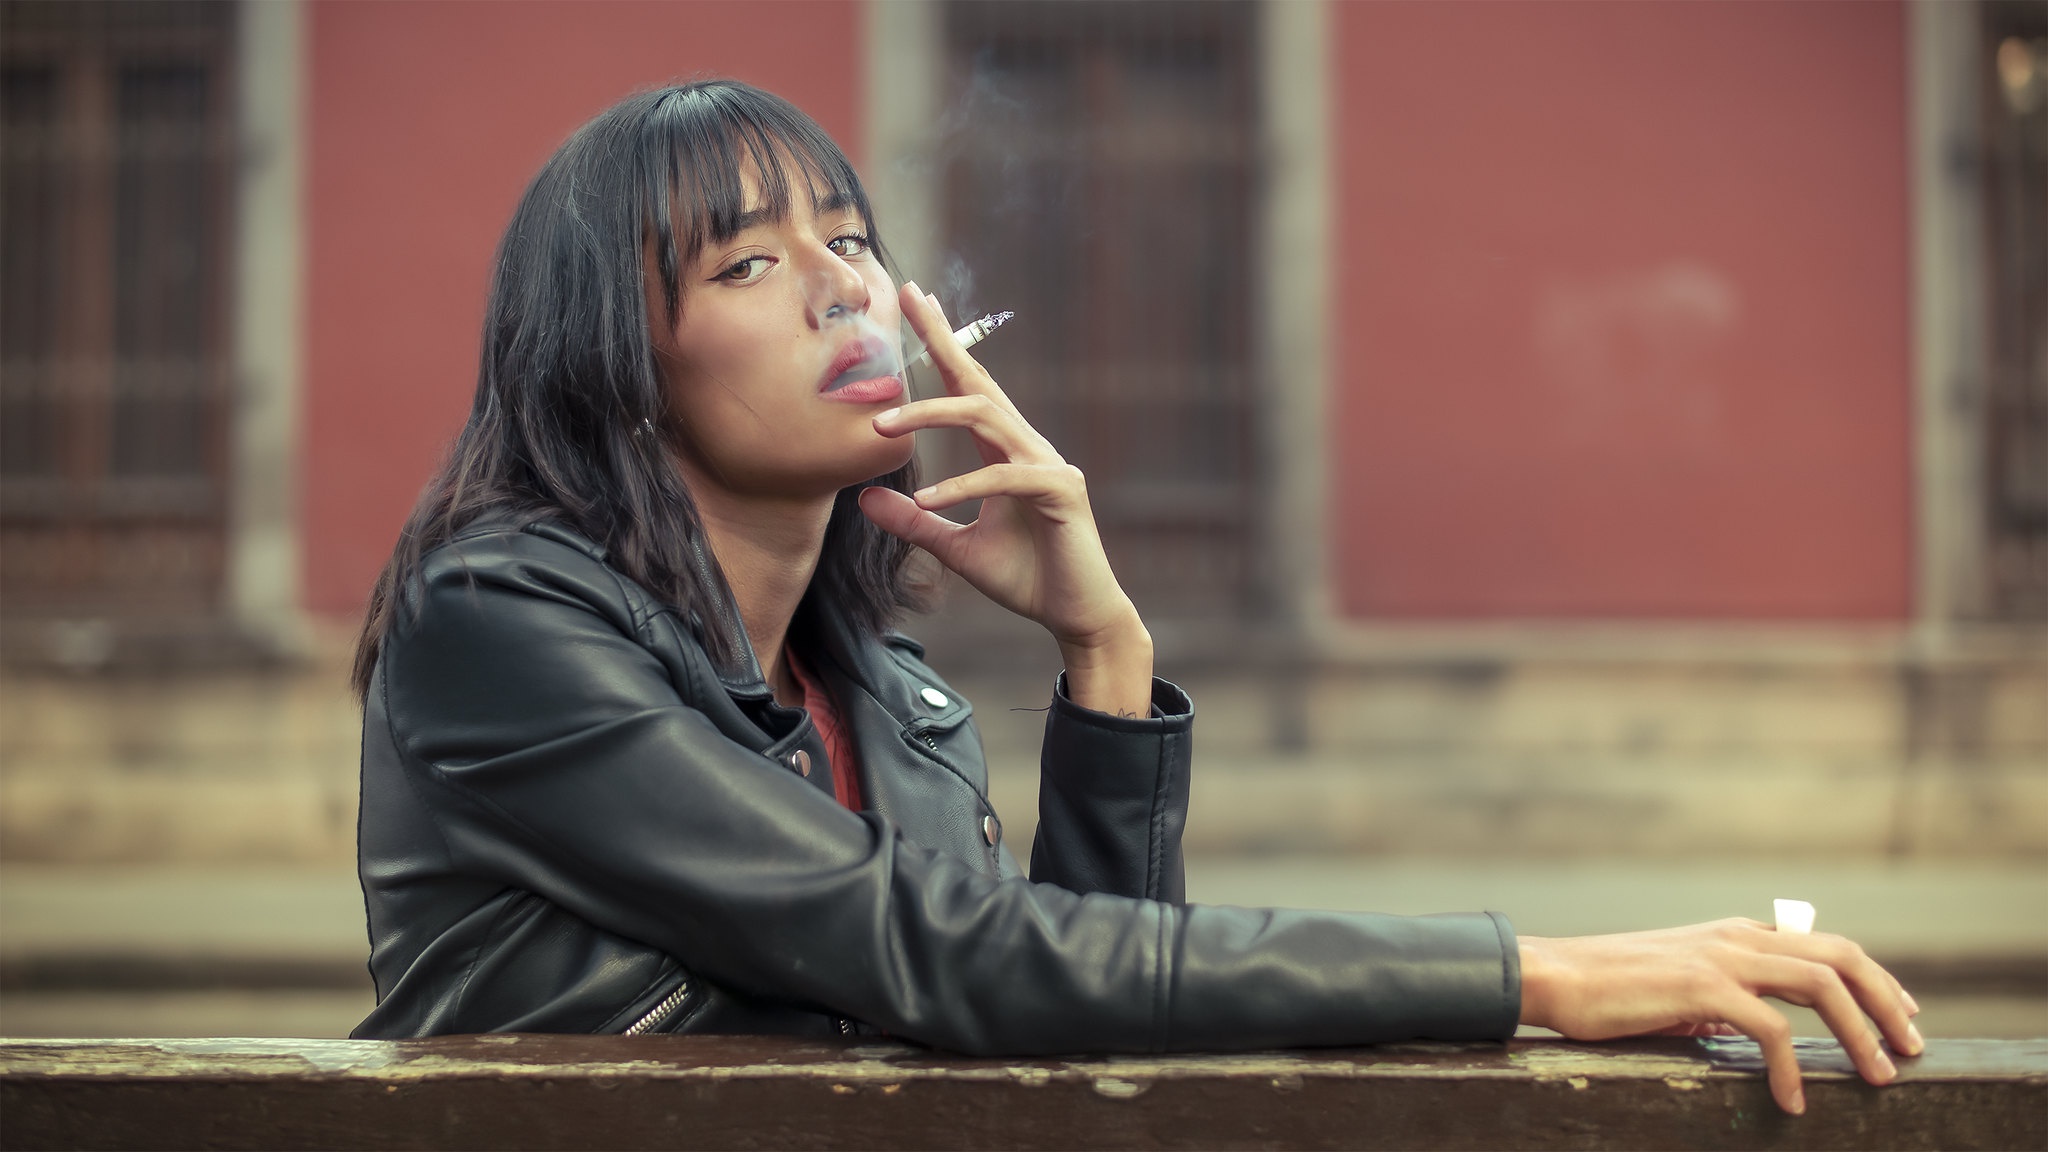 Model Smoking Women Looking At Viewer Leather Jackets Cigarettes Women Outdoors Black Hair Brunette 2048x1152